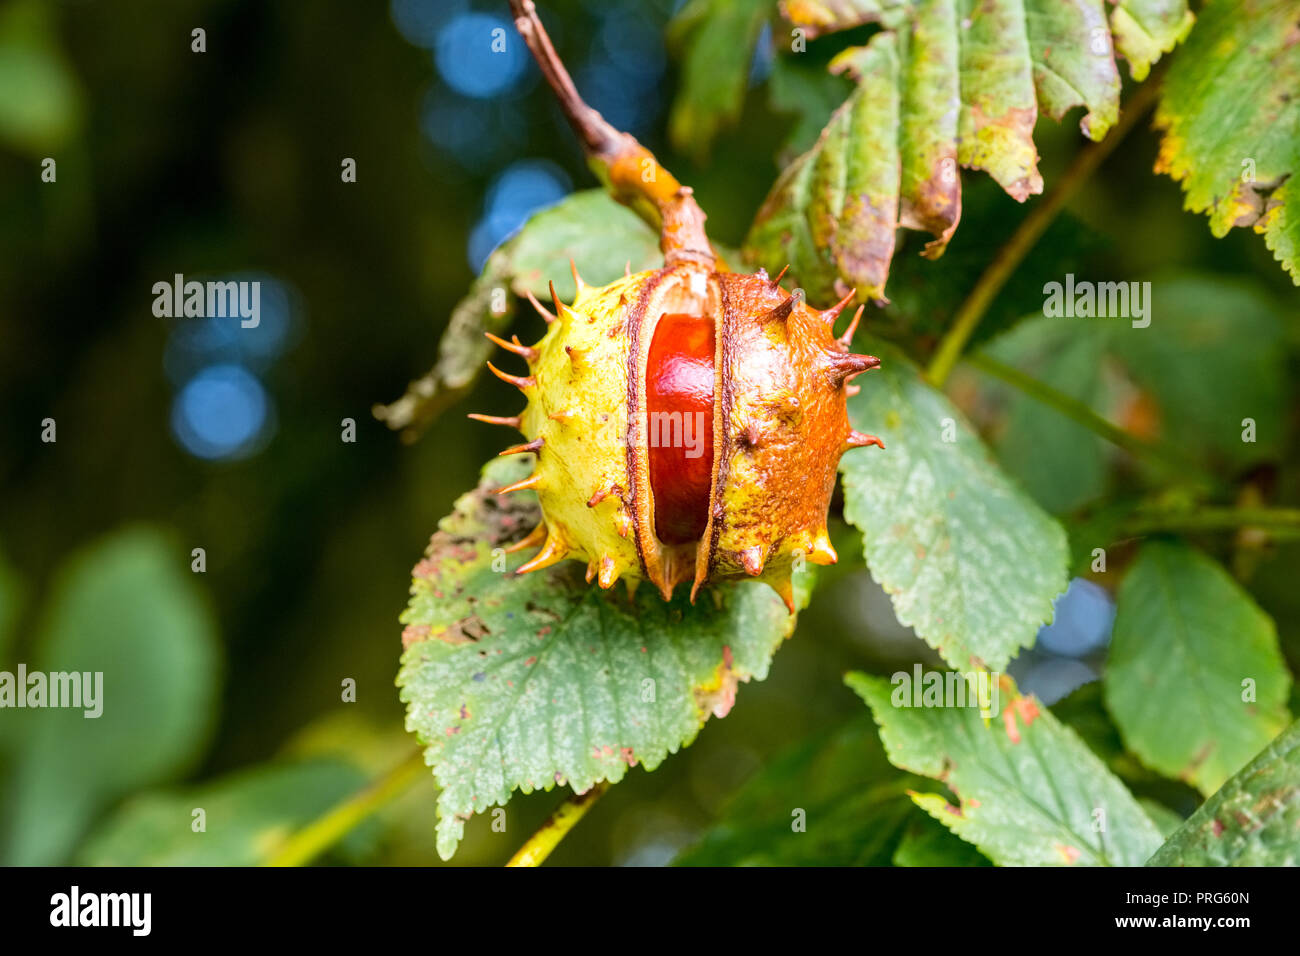 Ripe Conkers ( Horse Chestnuts ) ready to drop from the tree Stock Photo